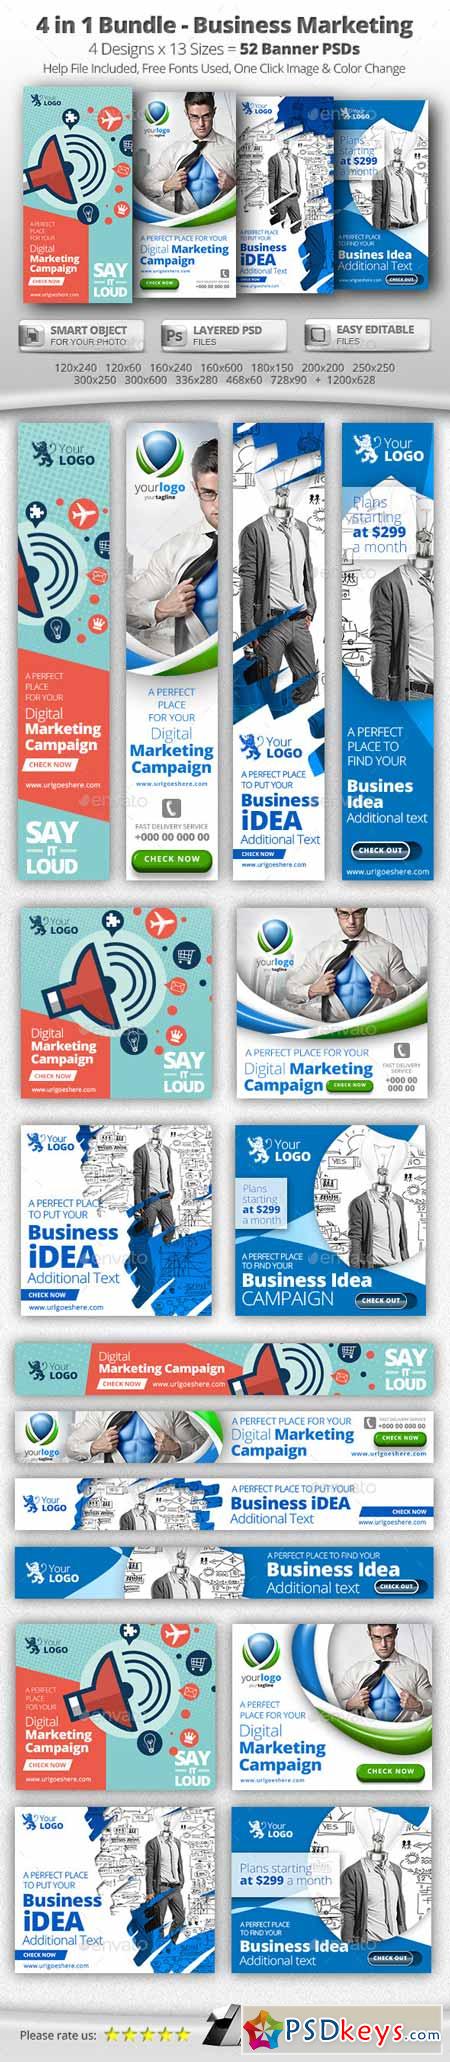 52 Business Marketing Web Banners - 4 in 1 Bundle 11964657